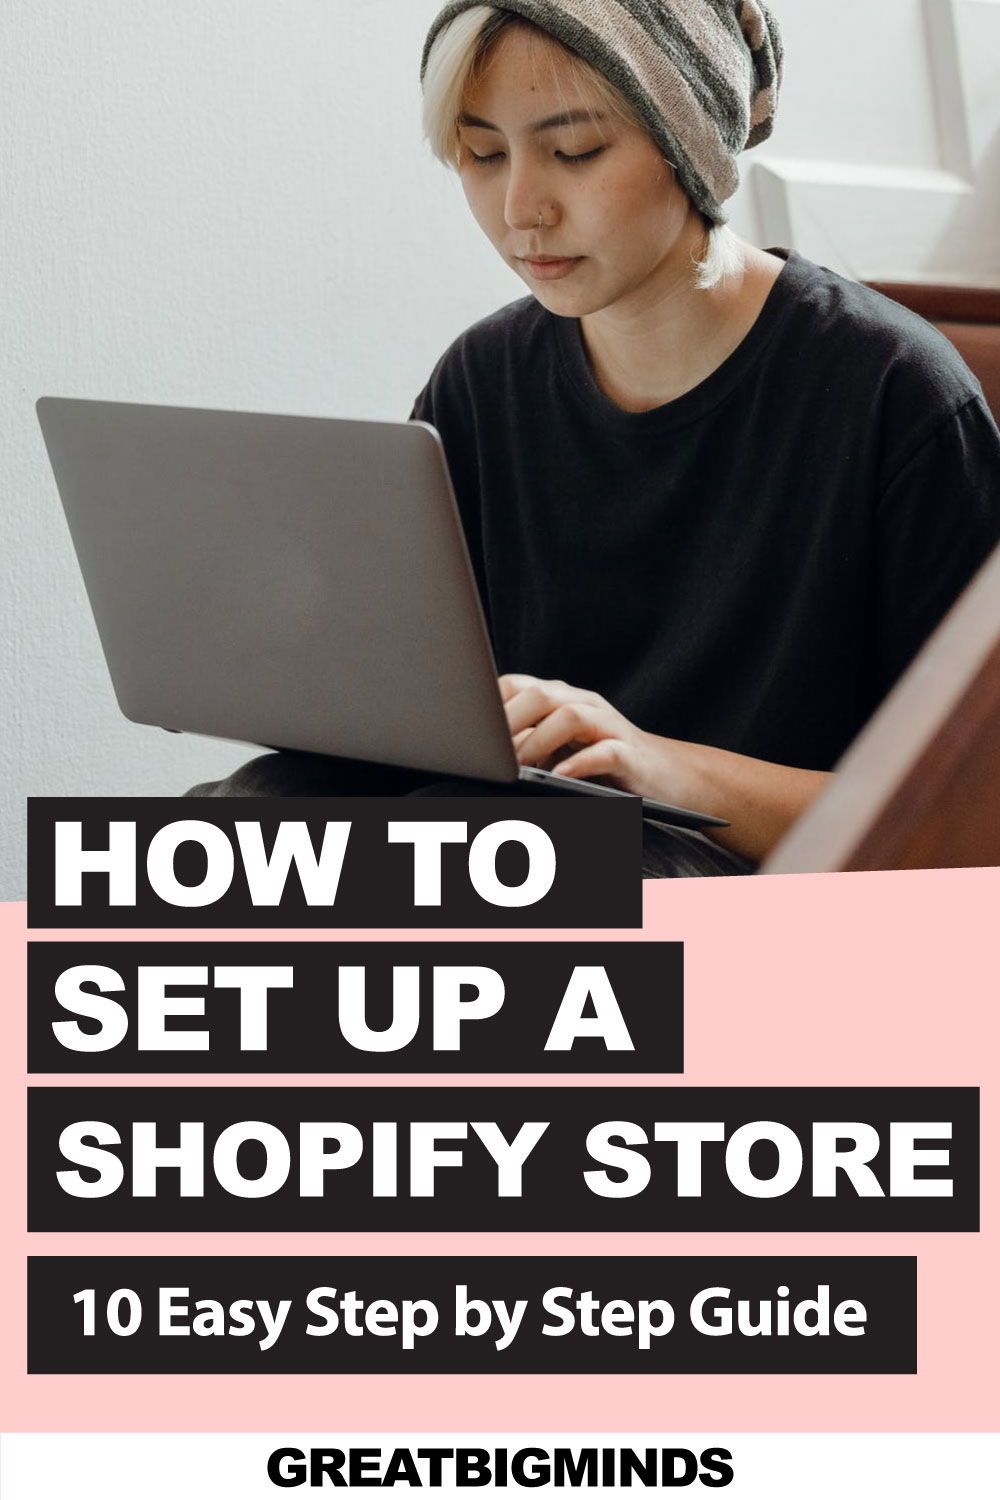 How To Step Up A Shopify Store 10 Easy Steps Shopify store 10 easy